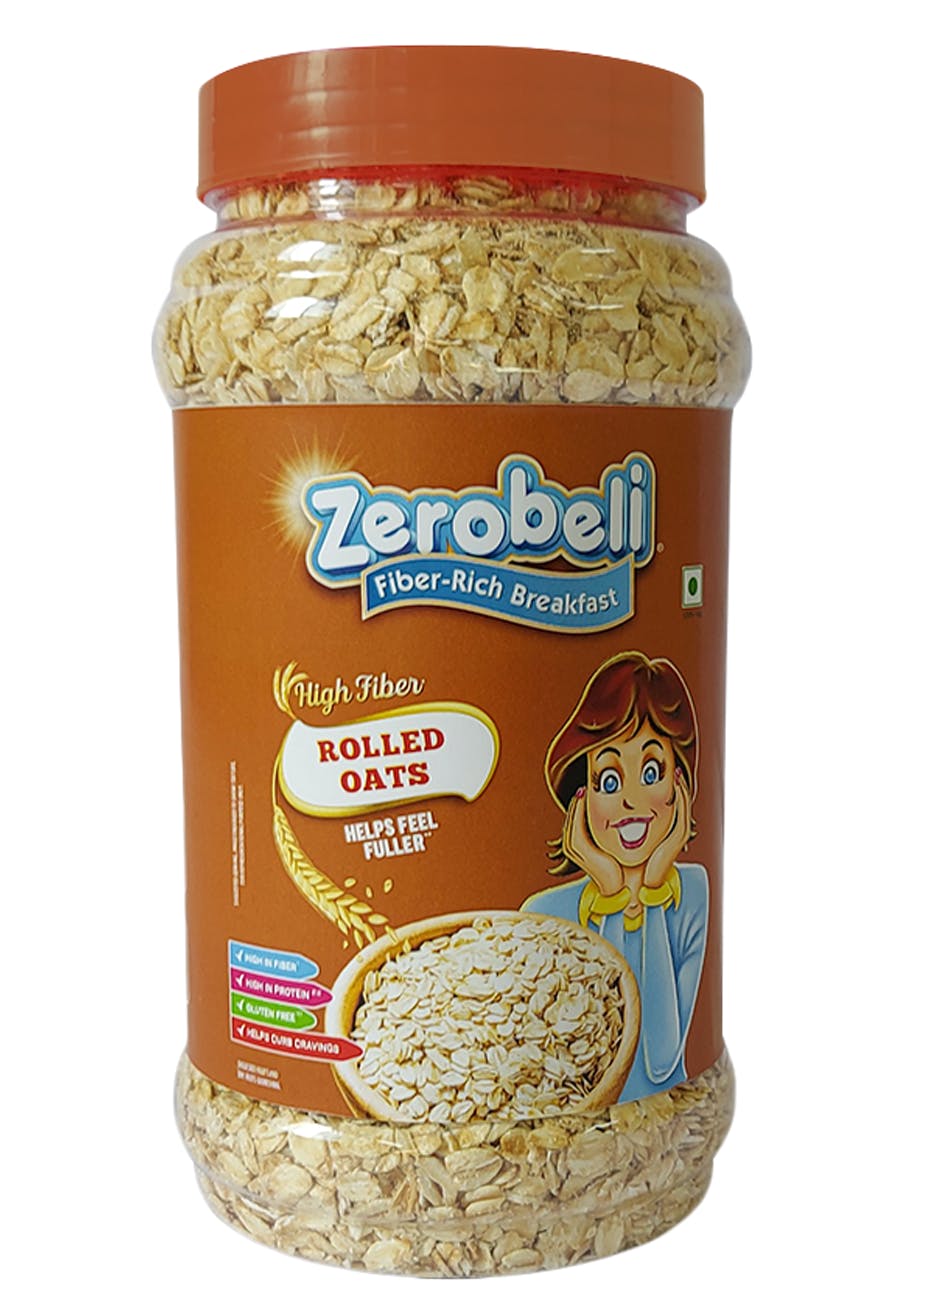 Whole Rolled Oats- 1.2kg